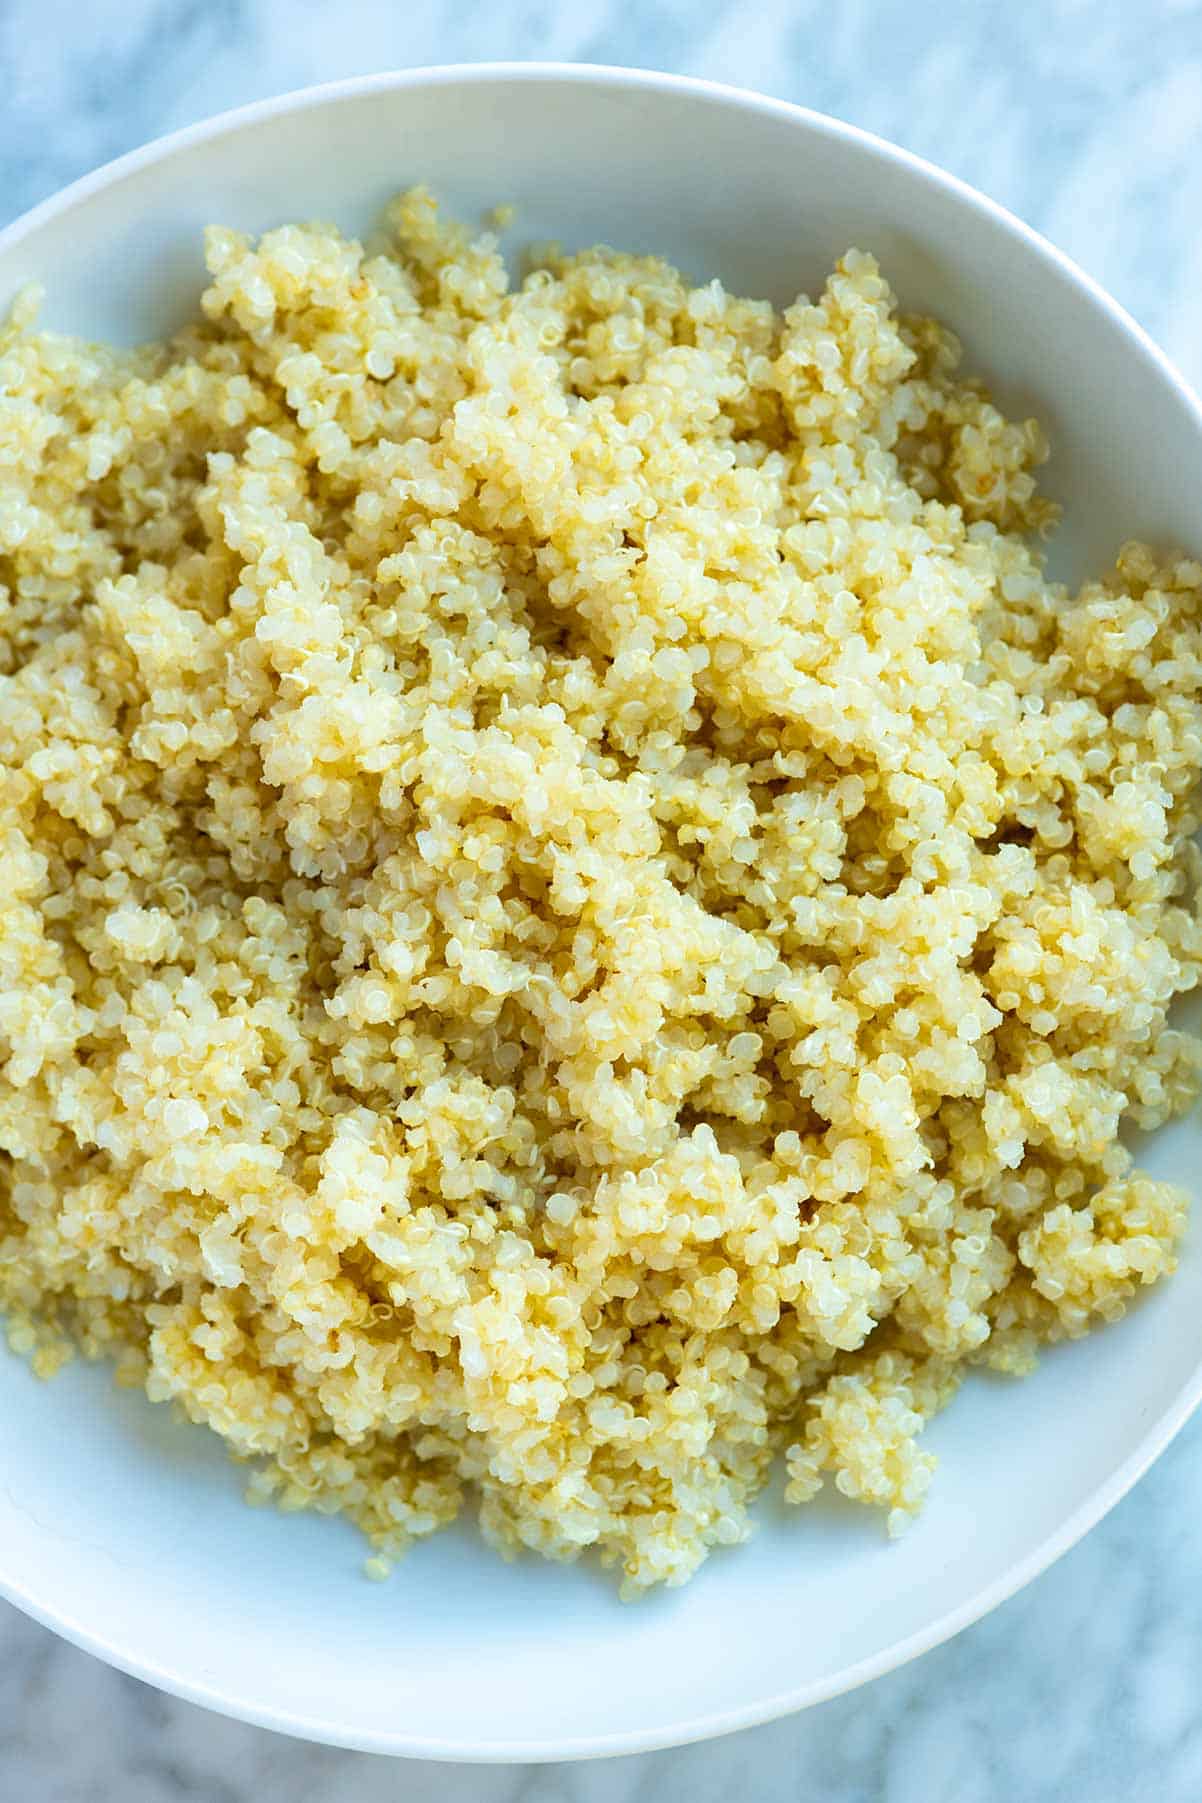 How To Prepare And Cook Quinoa